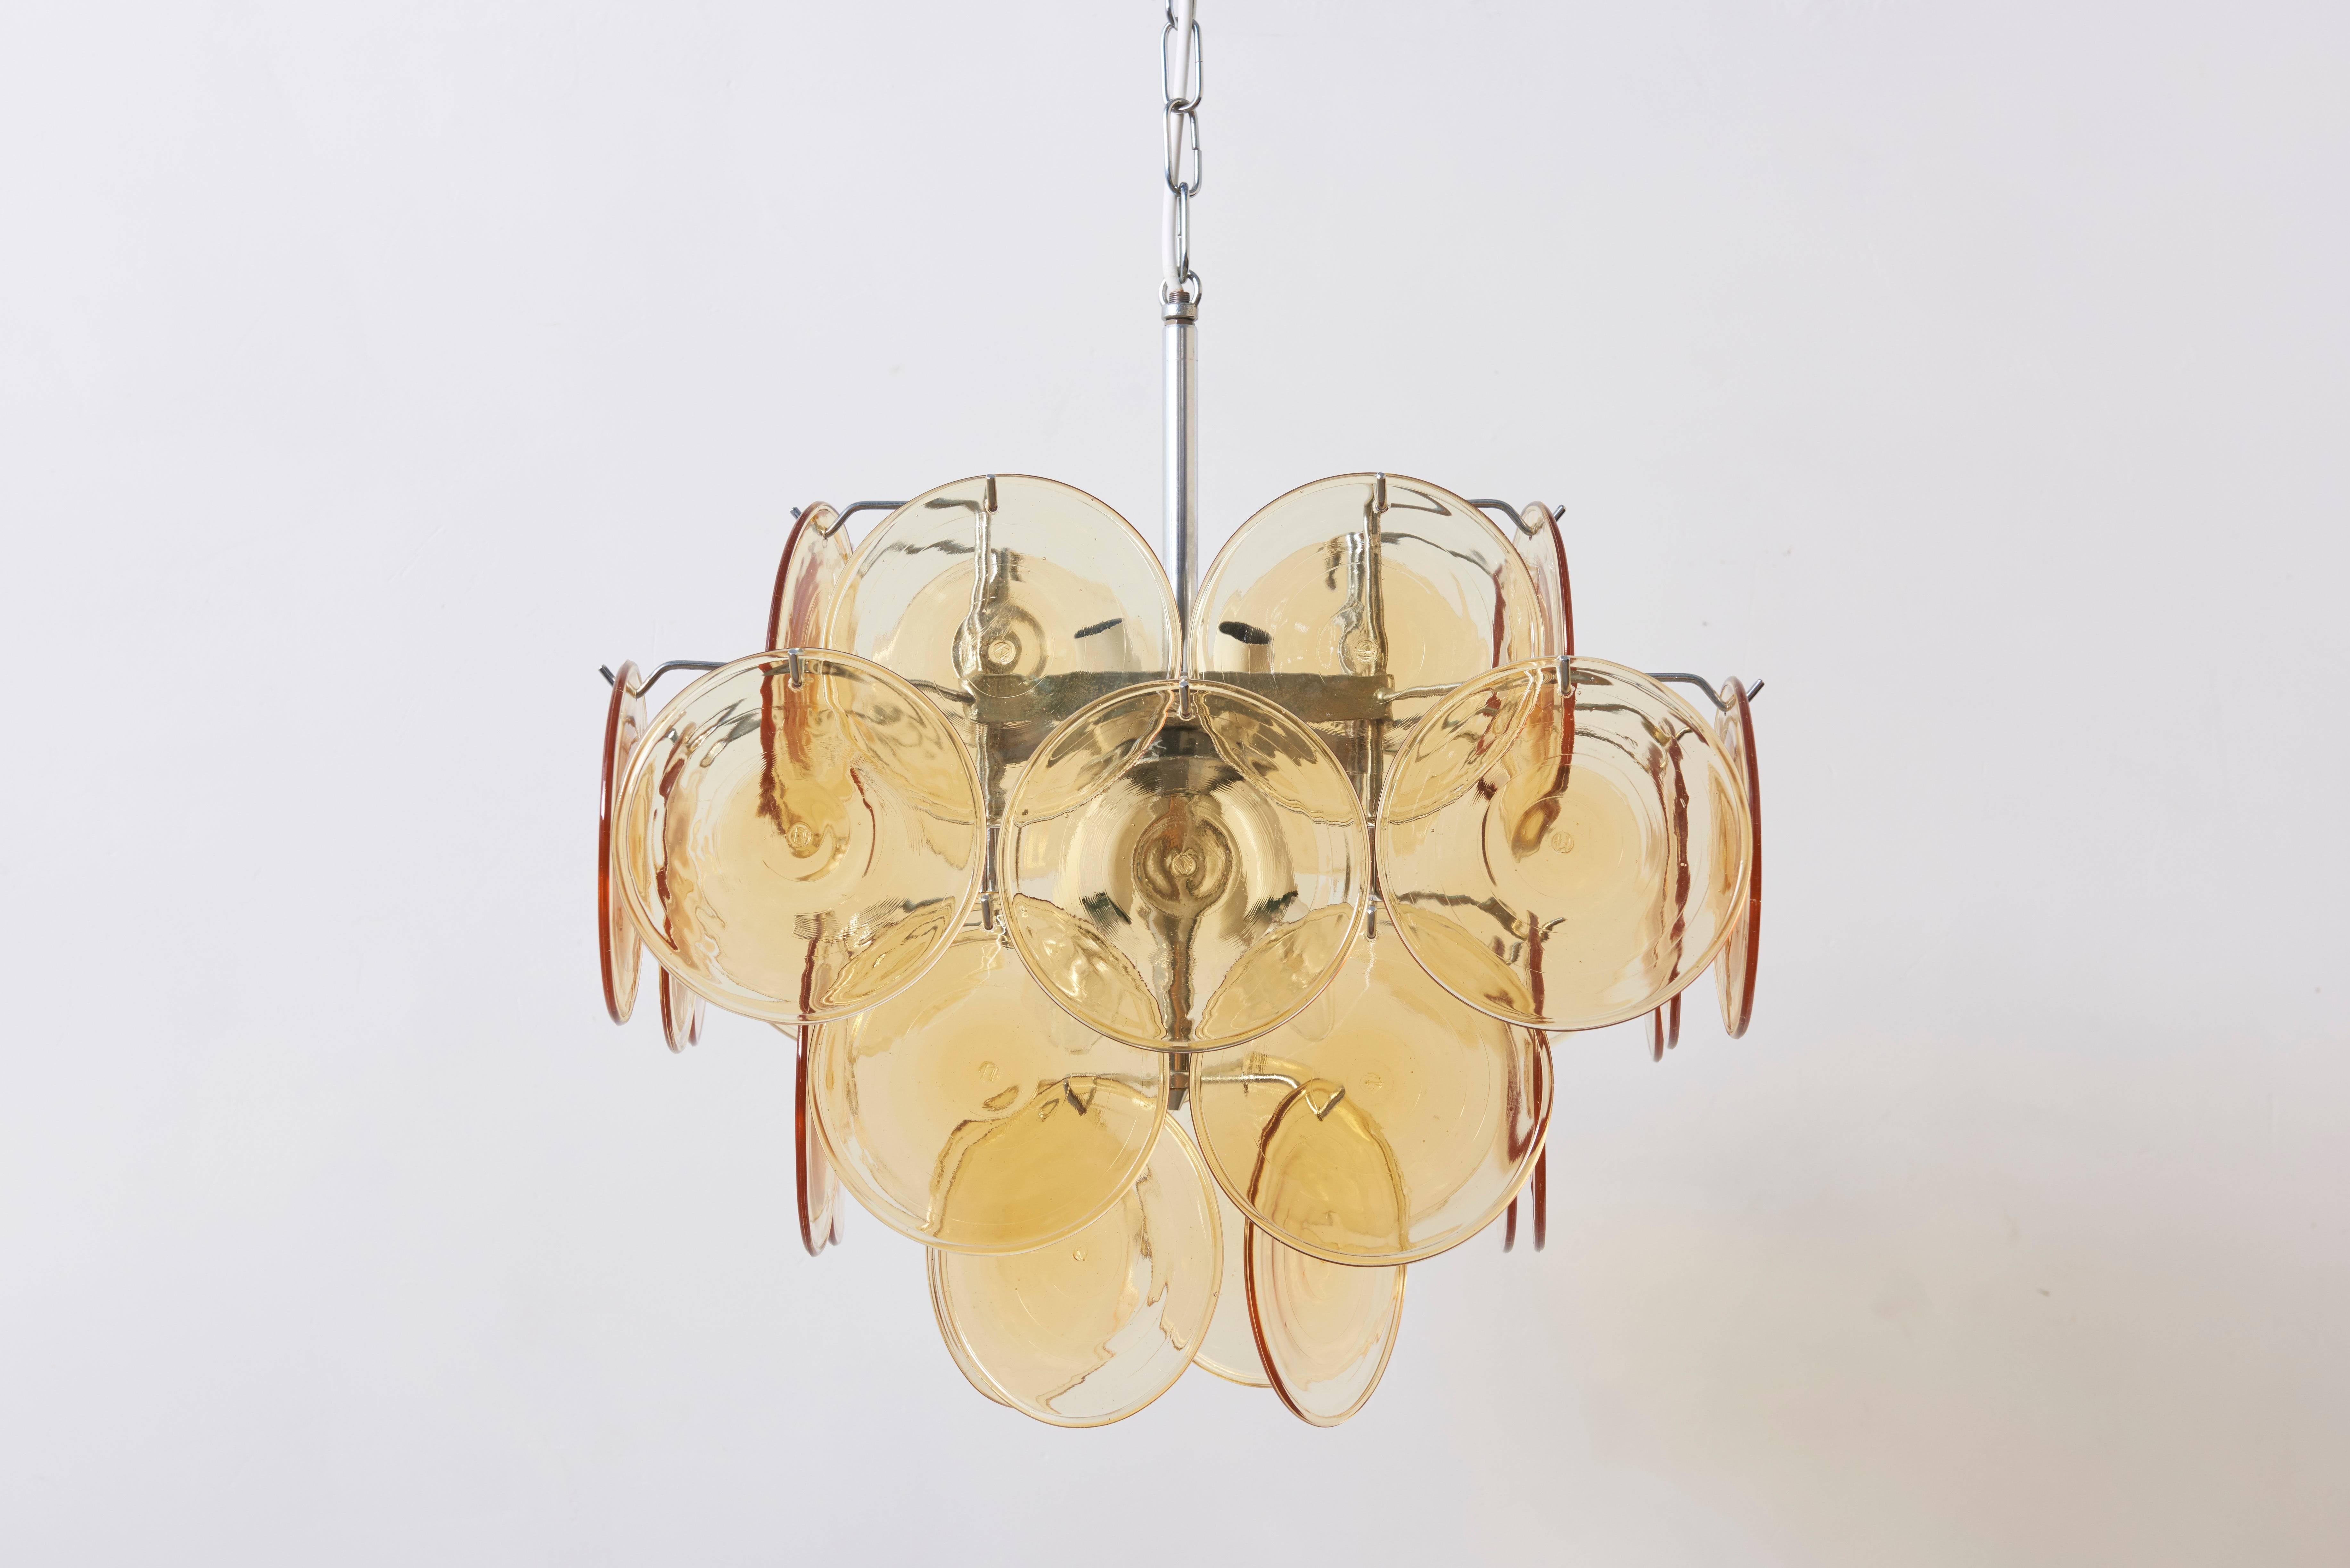 Midcentury colorful Italian chandelier by Vistosi with four tiers of 32 amber colored glass discs and chrome hardware.
The chandelier lights on eight small bulbs. Diameter 45 cm, height with chain 80 cm and height only the glass discs 40 cm.
Free